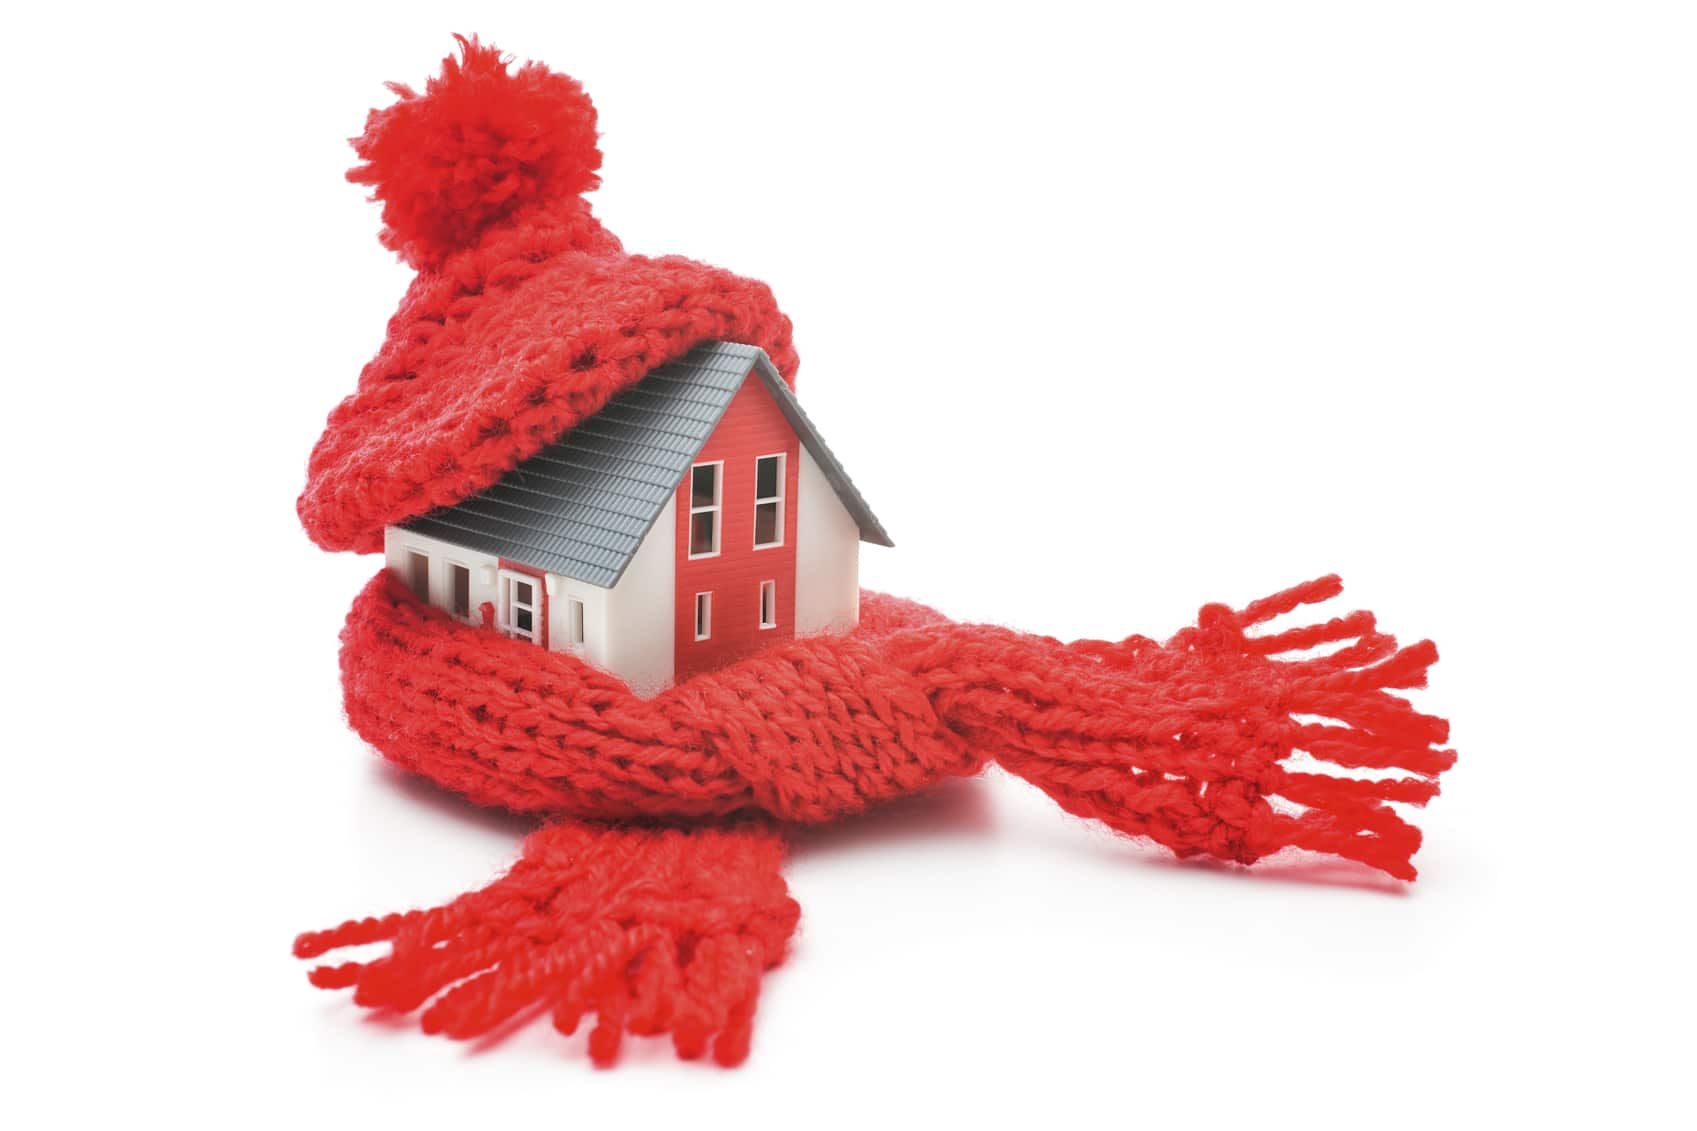 Tiny house wrapped in sweater and hat